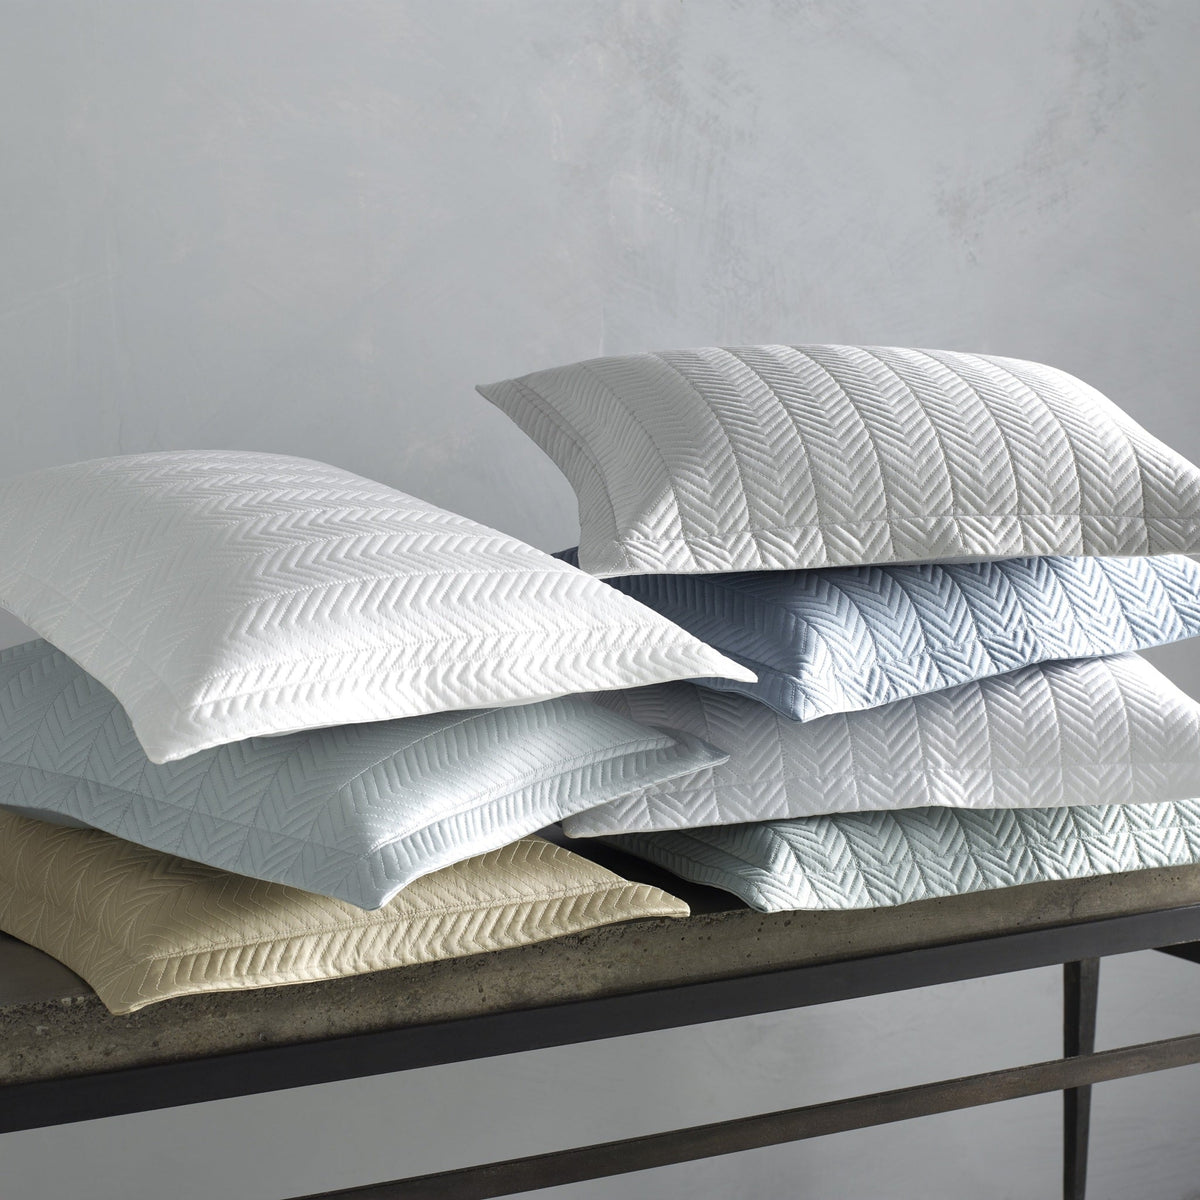 Stack of Matouk Netto Bedding in Different Colors